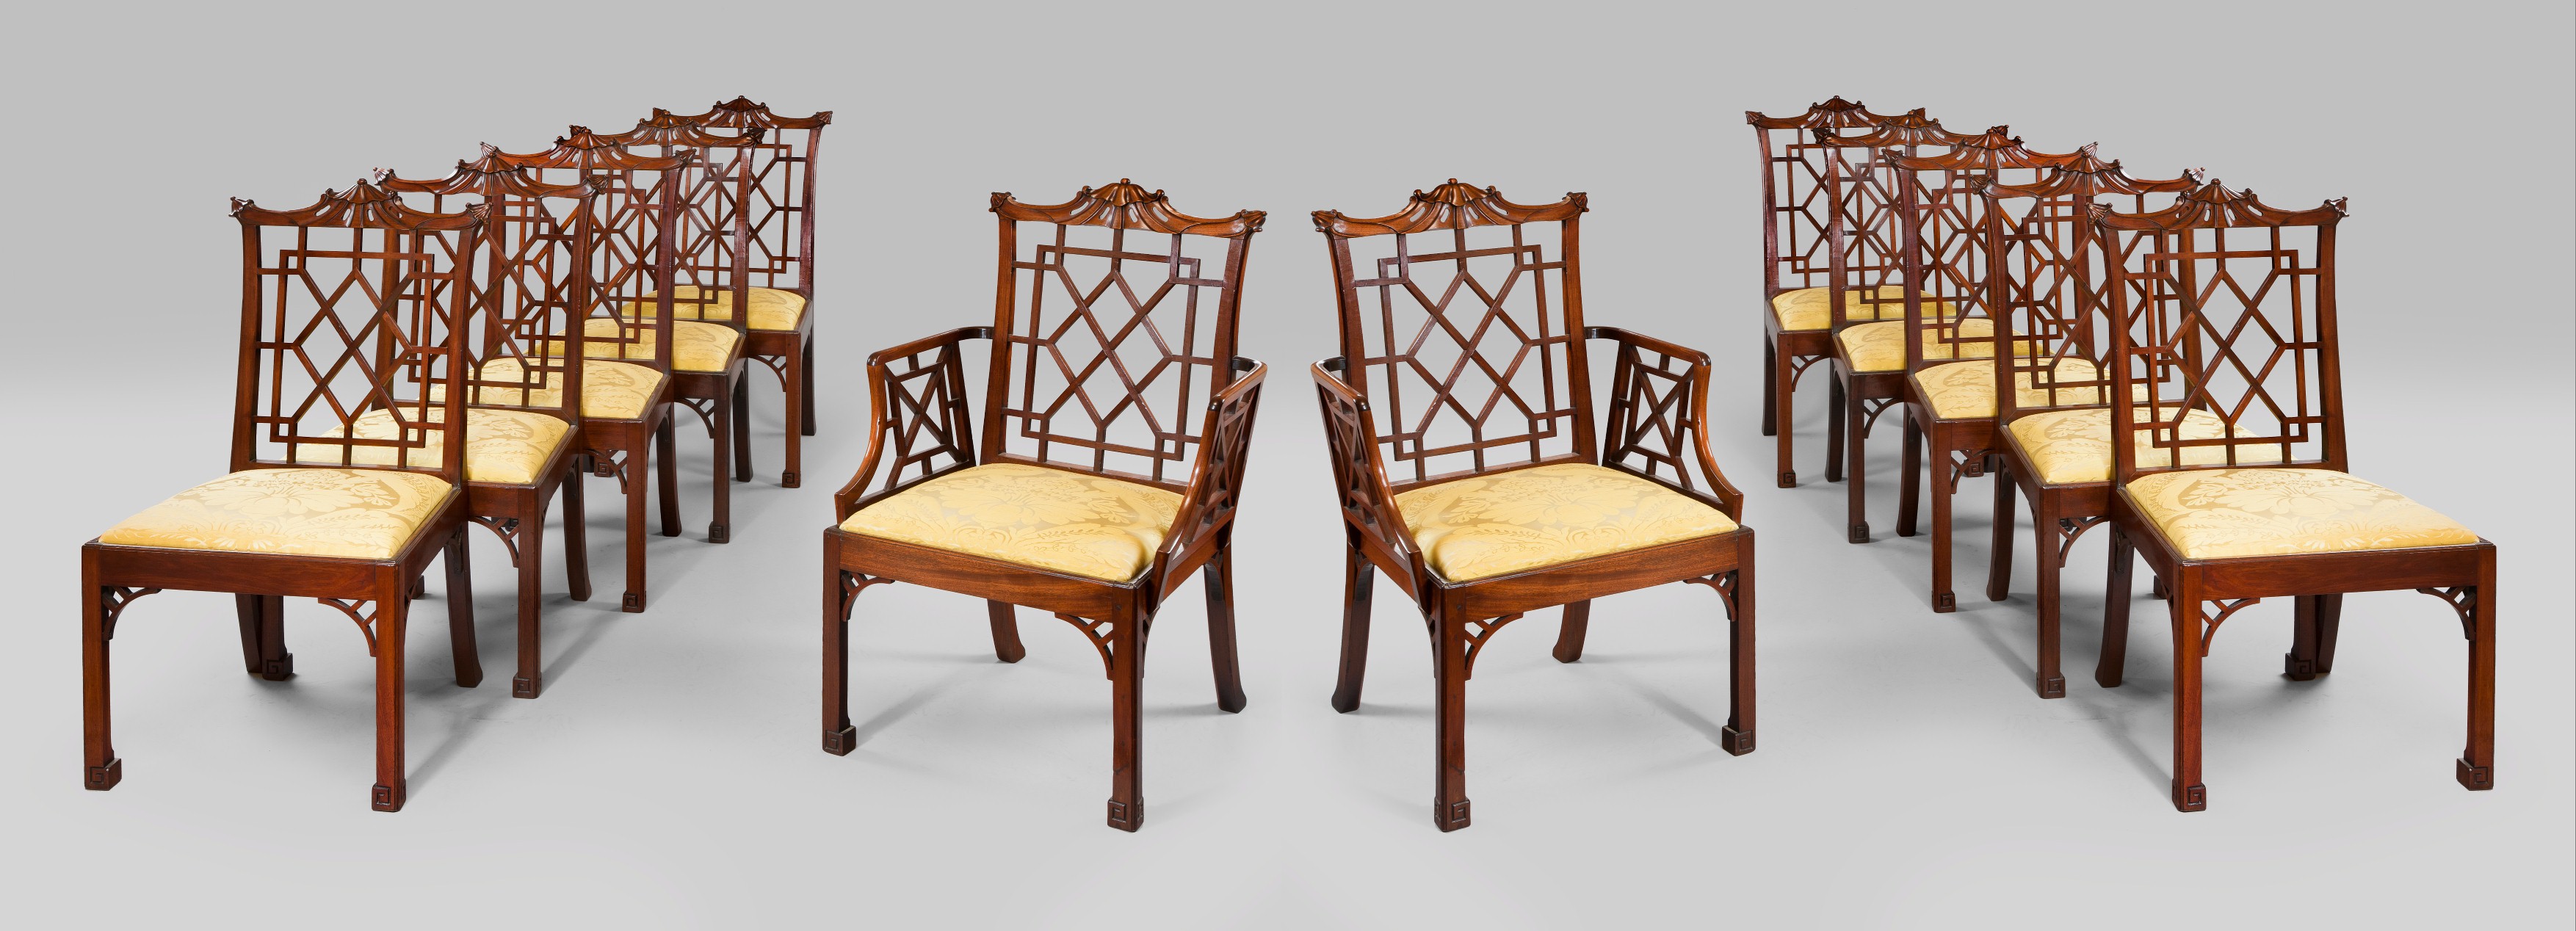 A Set of Twelve Chinese Chippendale Mahogany Side Chairs Attributed to Thomas Chippendale